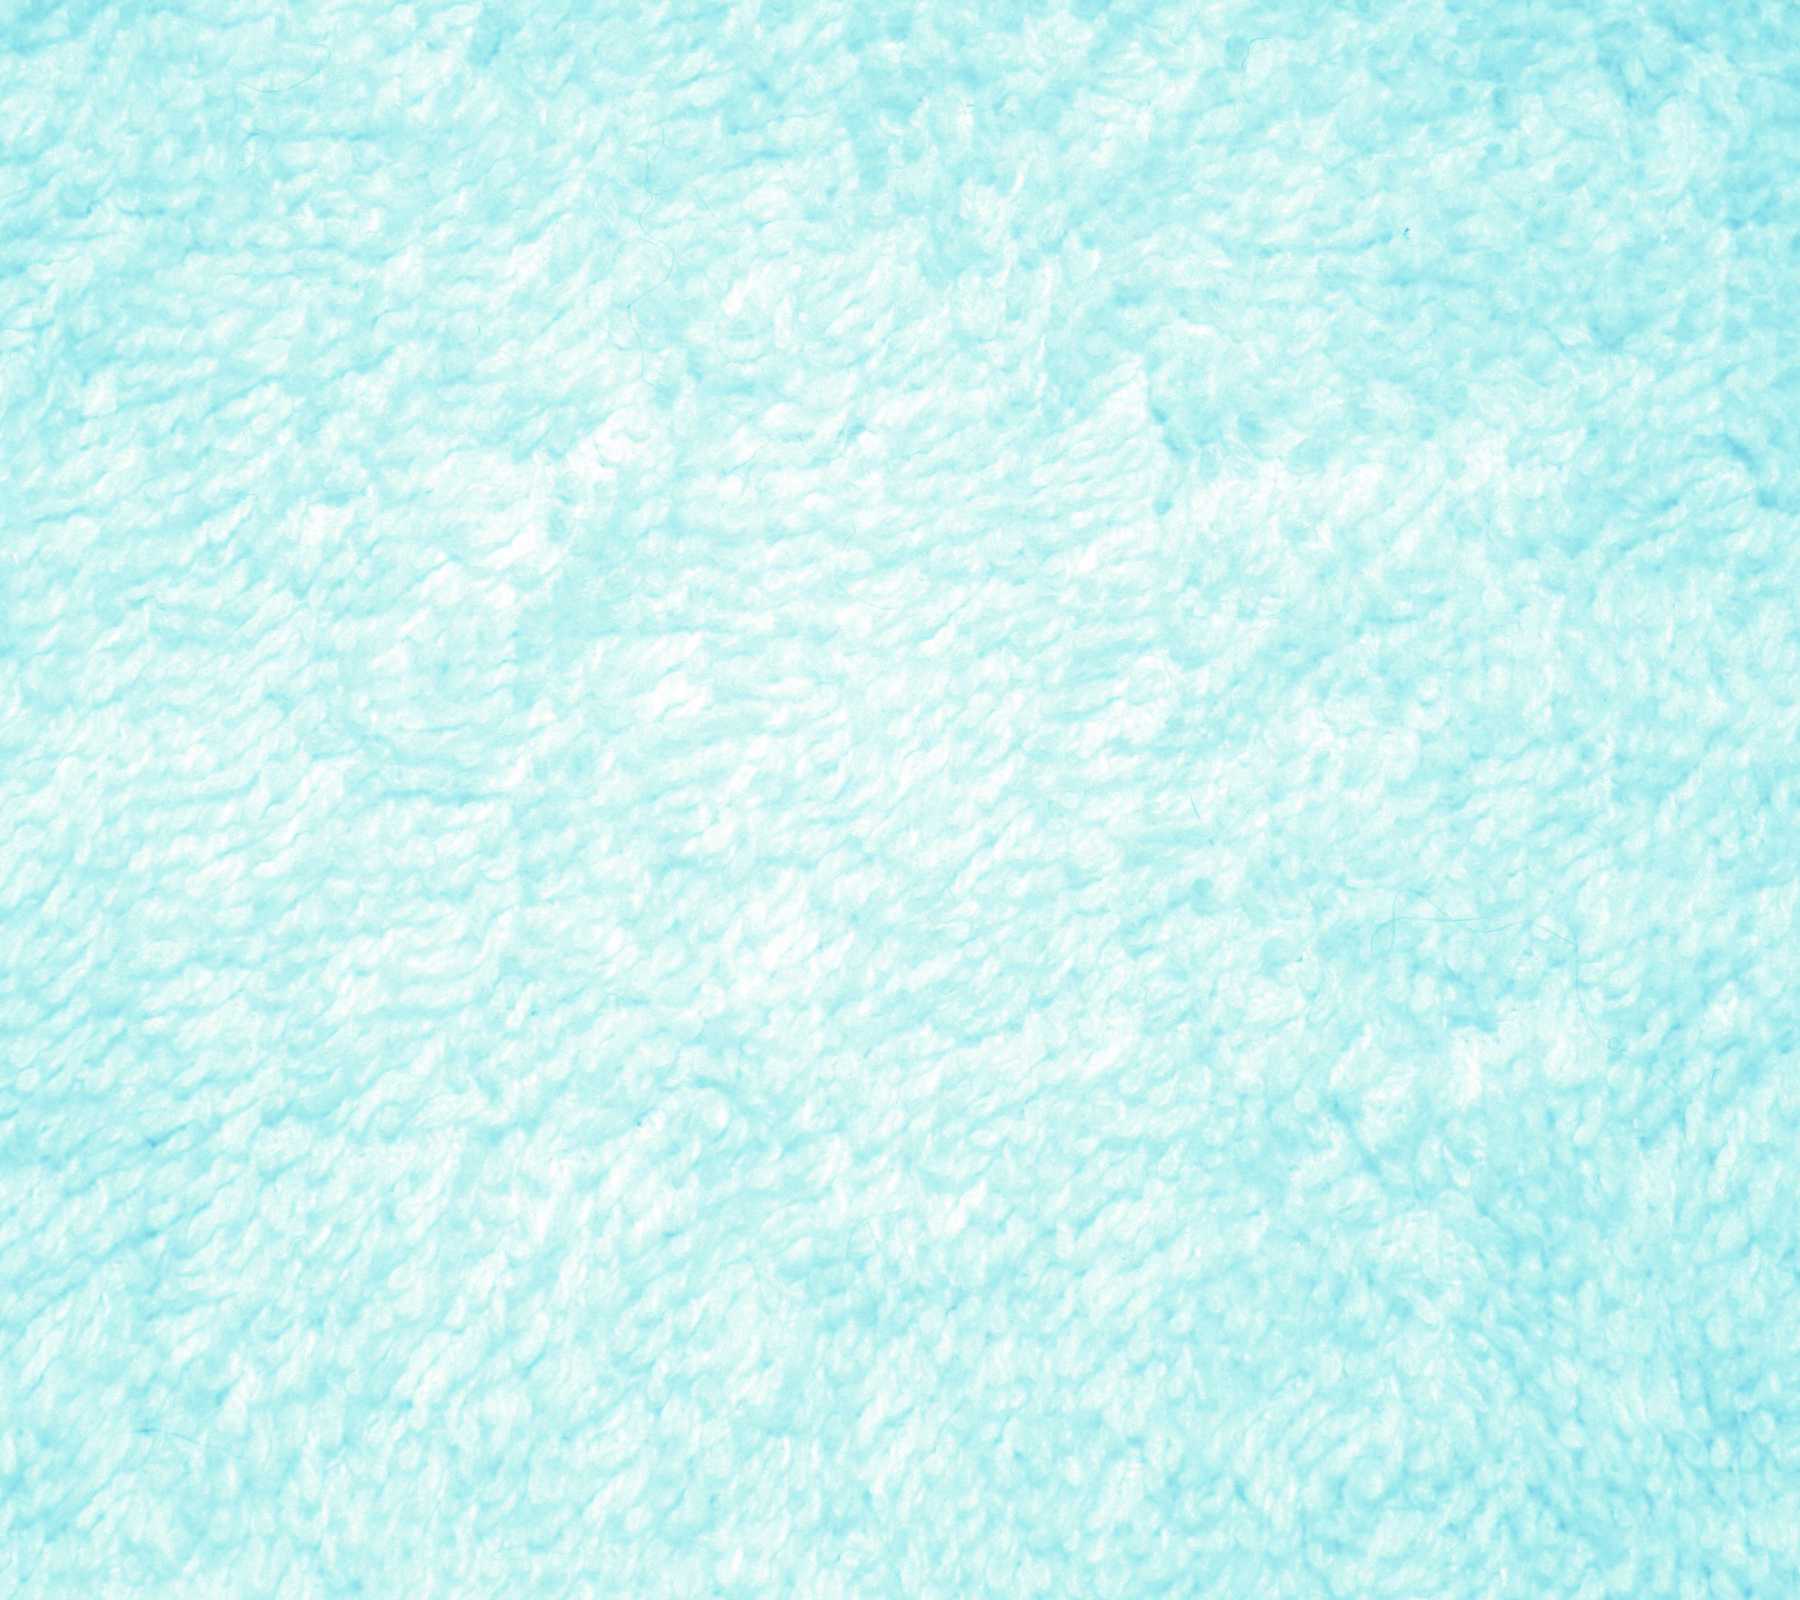 Free download Teal Terry Cloth Towel 1800x1600 Background Twitter Background [1800x1600] for your Desktop, Mobile & Tablet. Explore Pretty Teal Wallpaper. Teal Blue Wallpaper, Teal iPhone Wallpaper, Teal and Gold Wallpaper